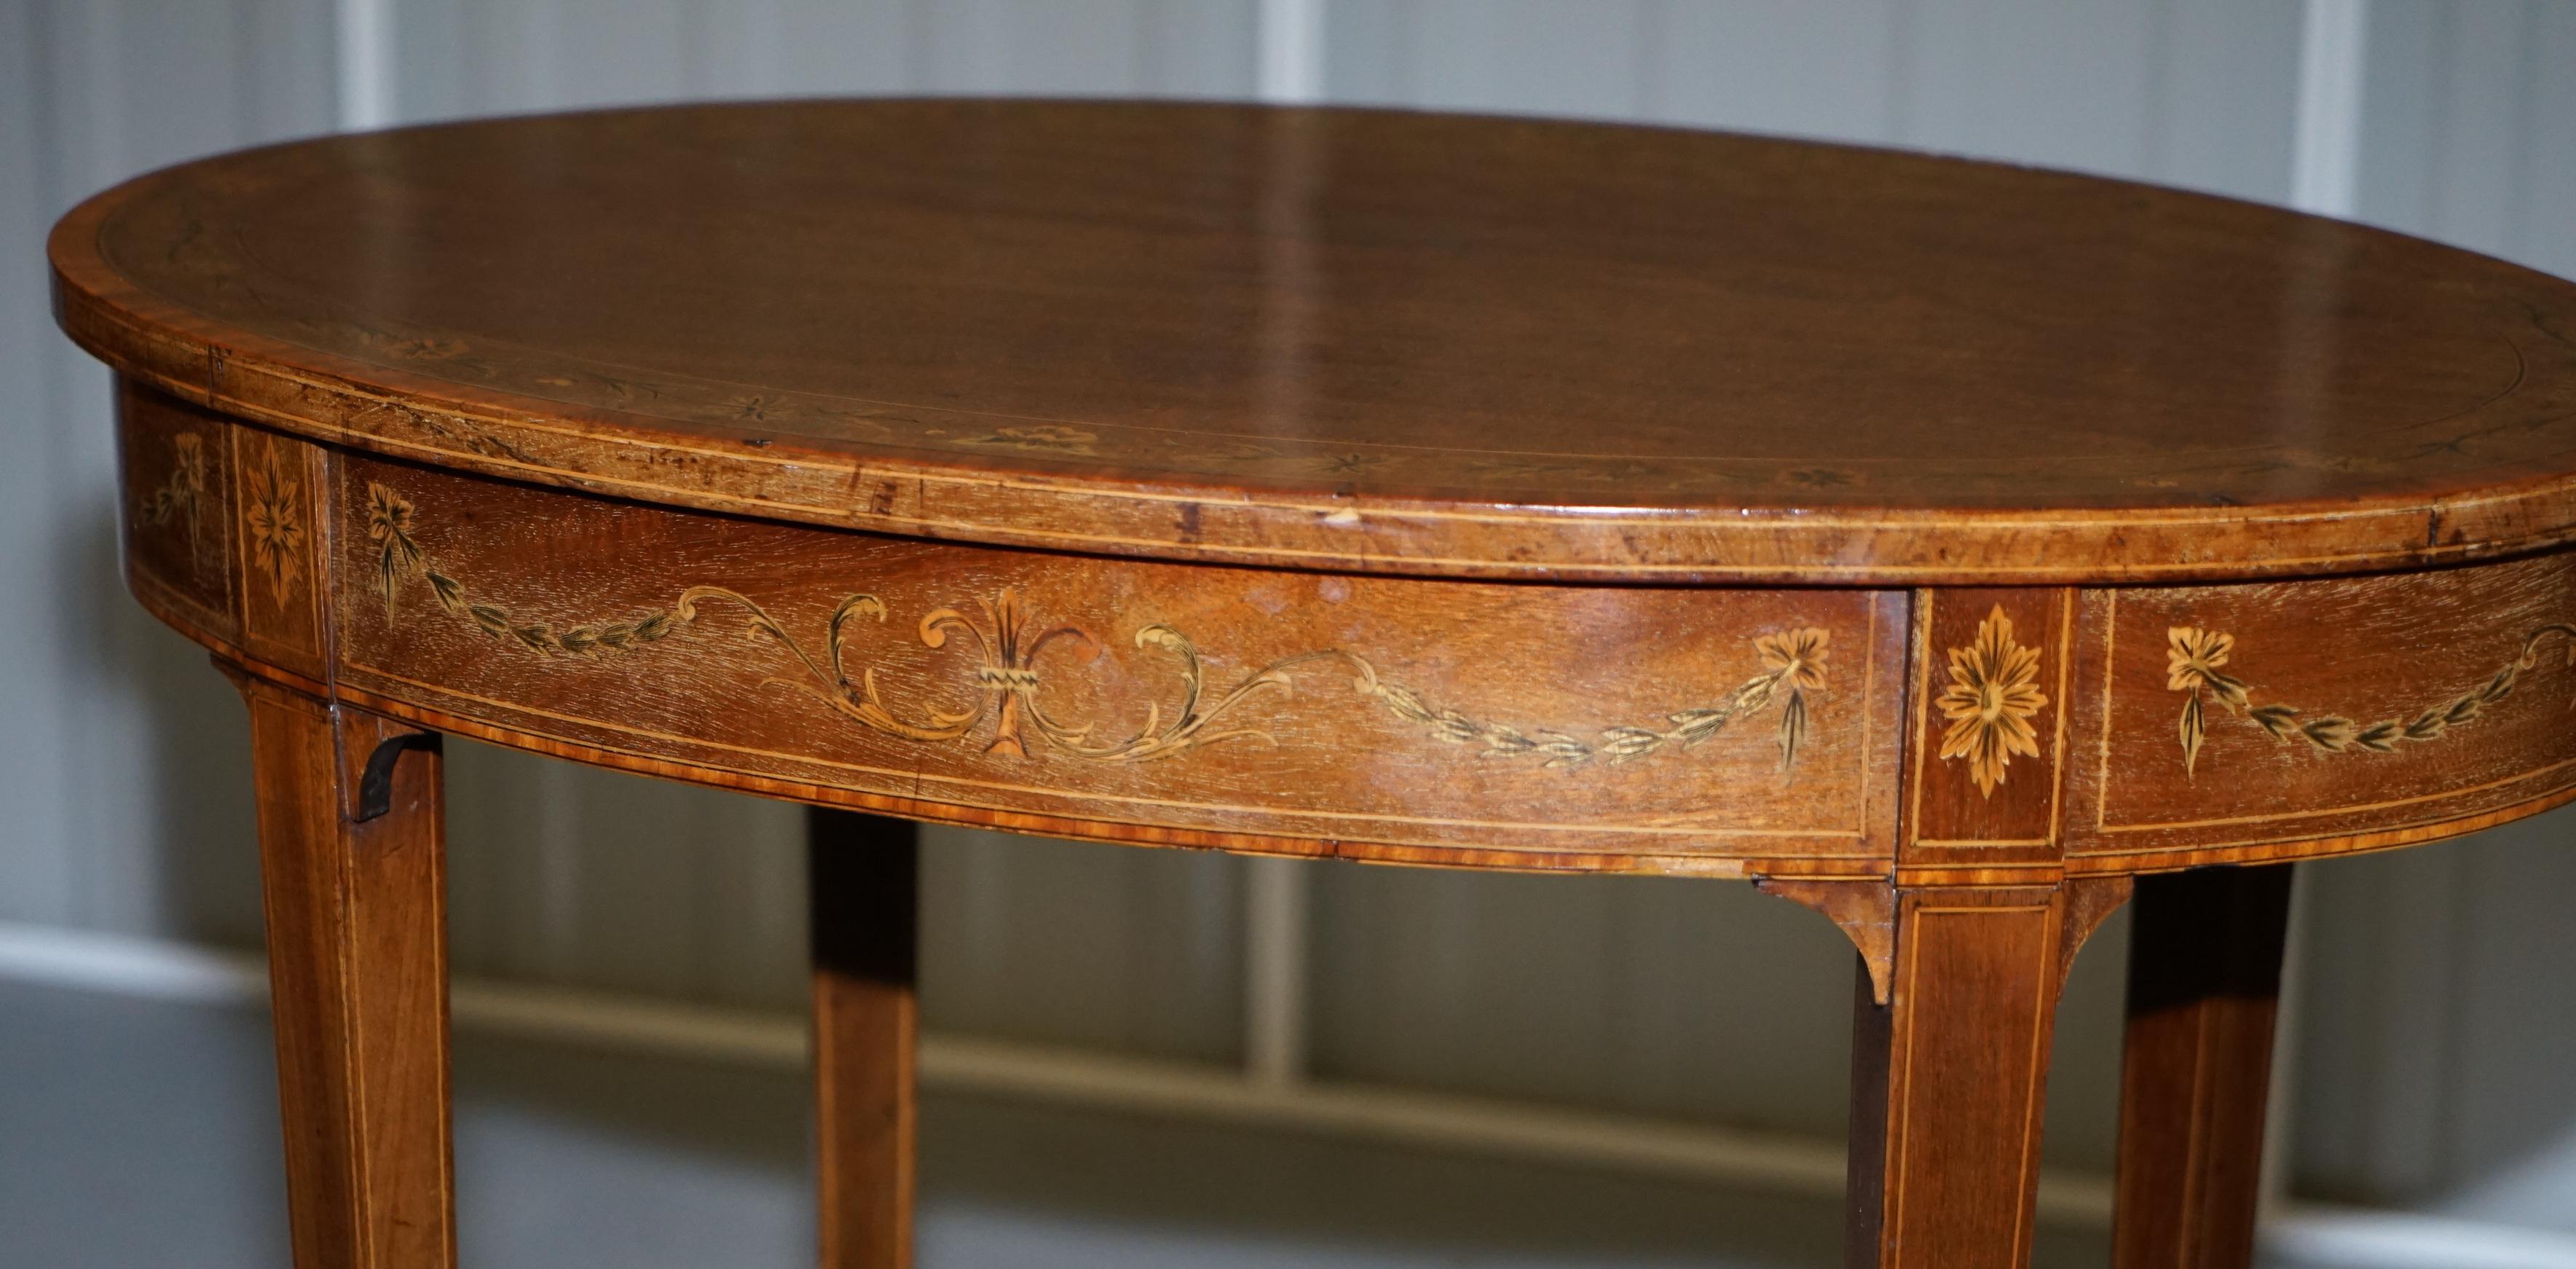 Stunning Floral Inlaid Sheraton Victorian Walnut Oval Occasional Side End Table For Sale 3